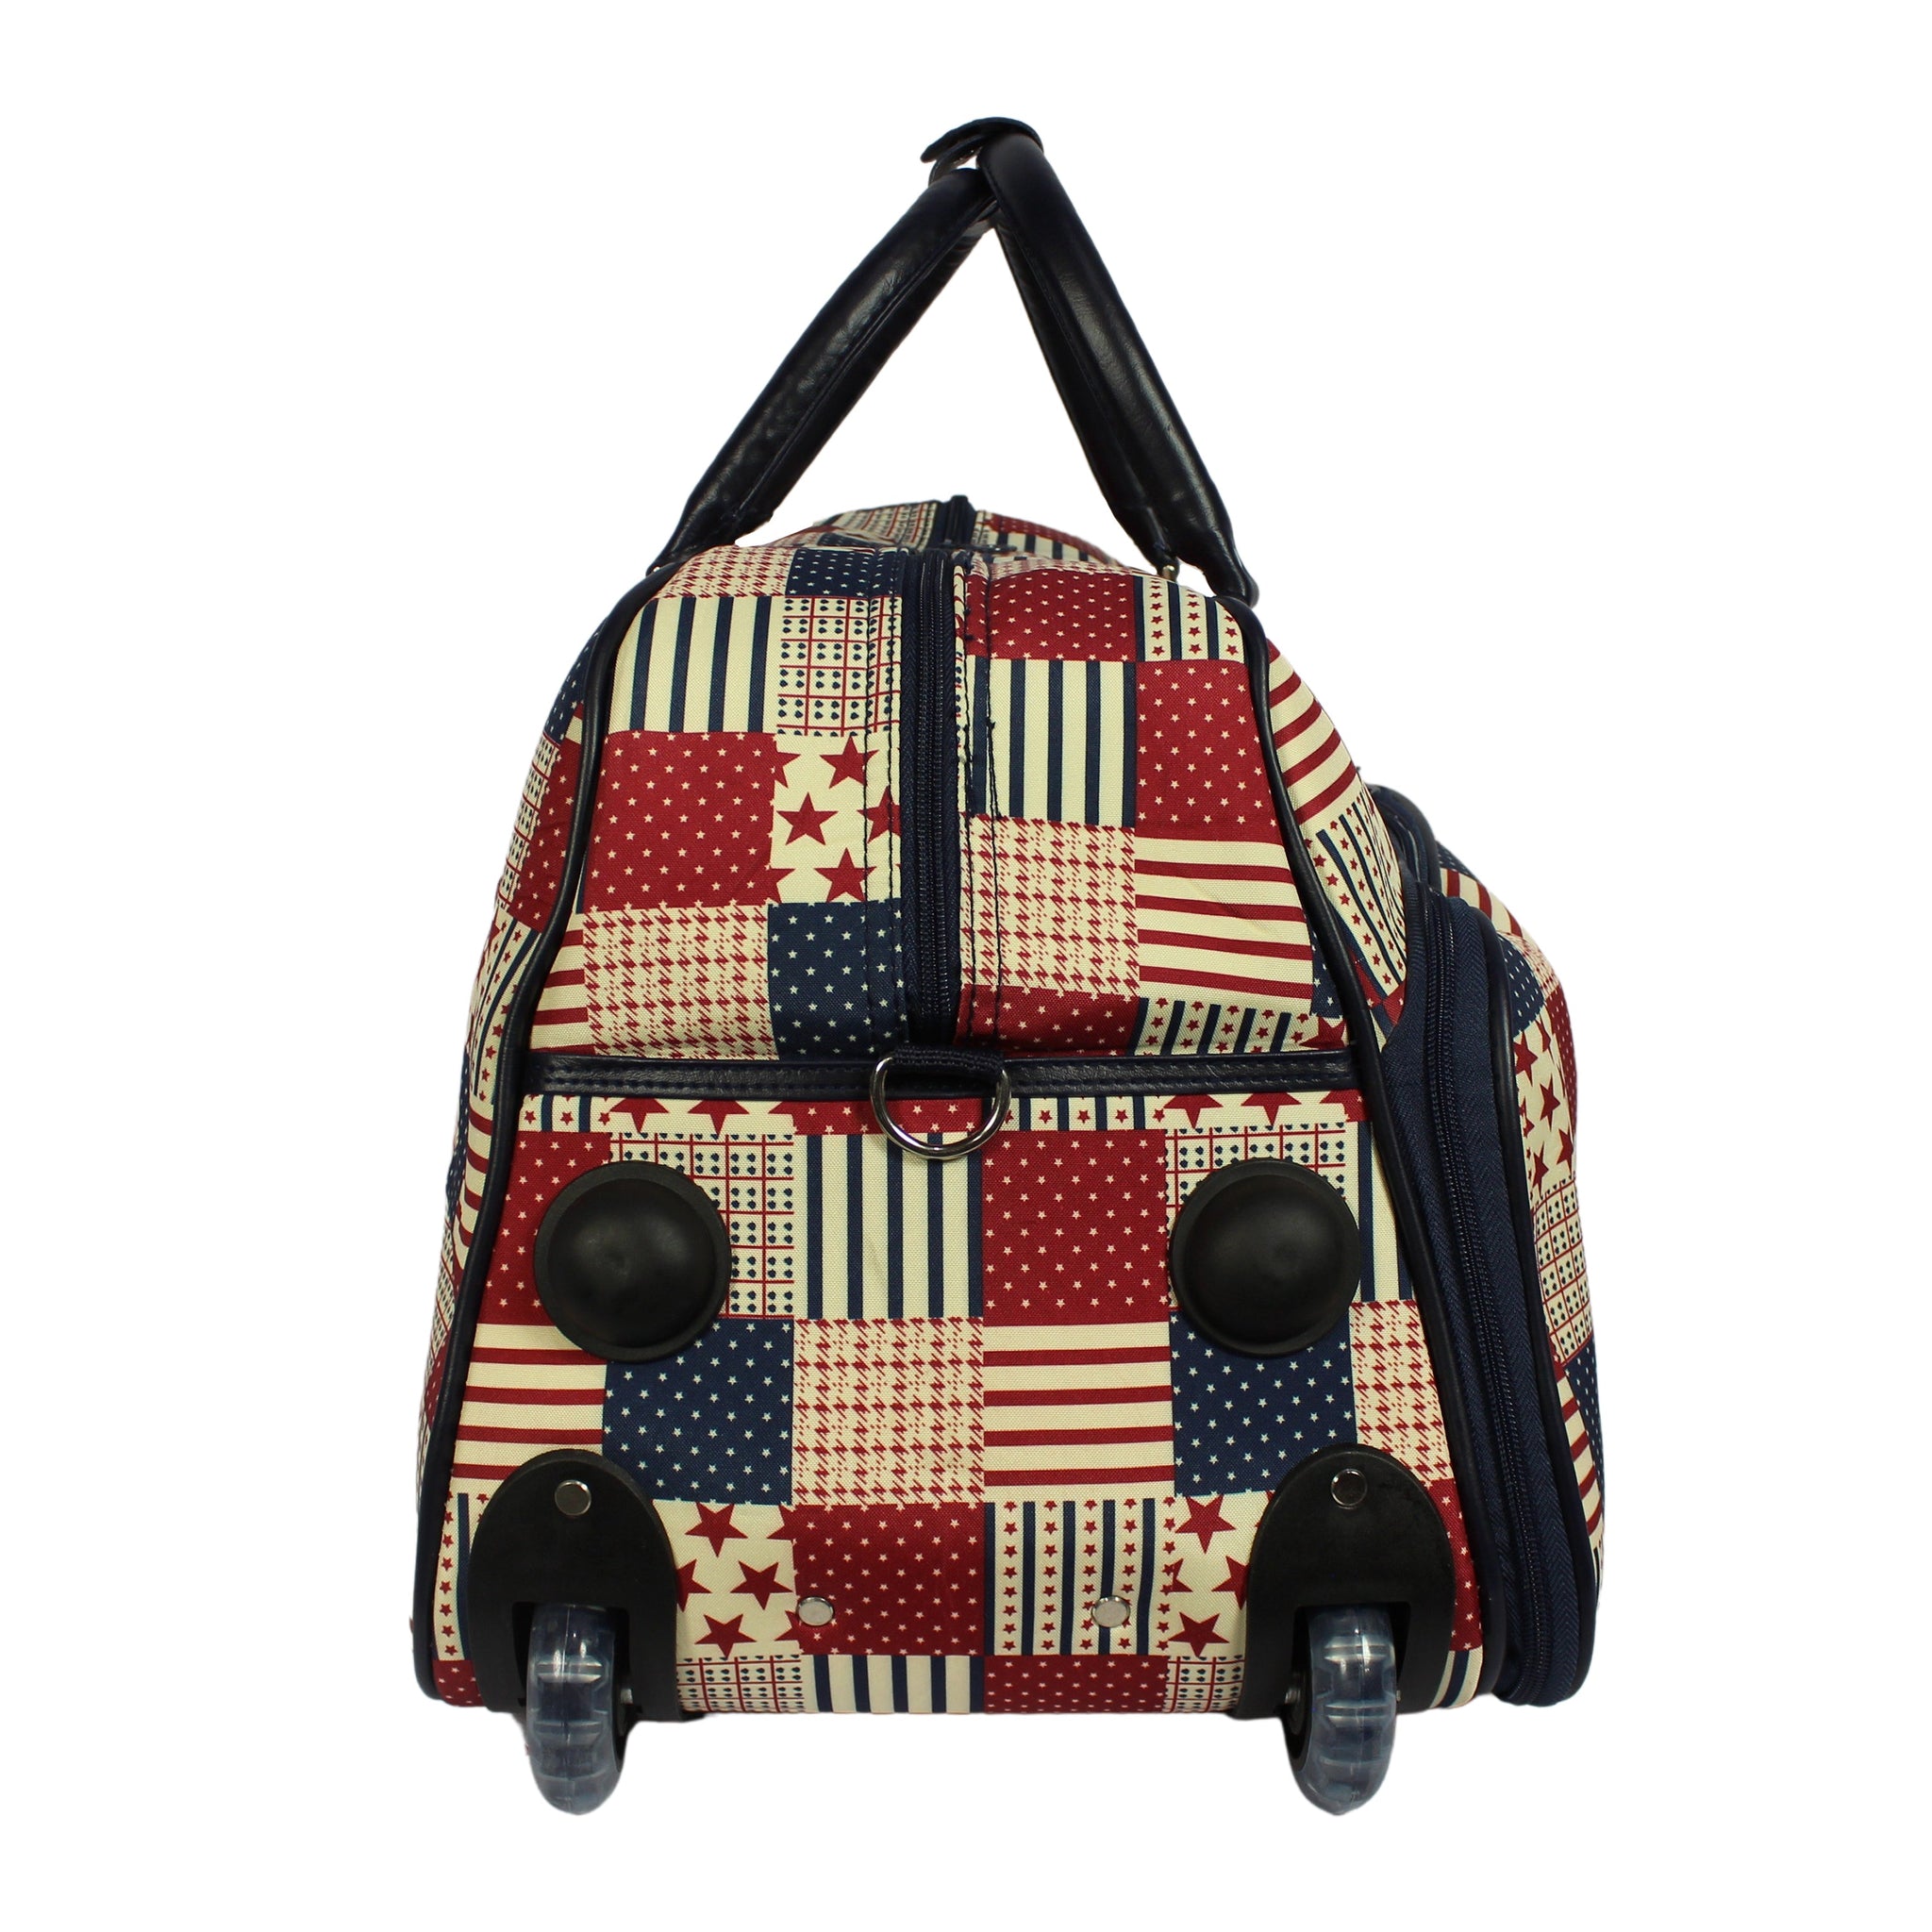 CalBags 21" Rolling Carry-On Duffel Bag - USA Flag